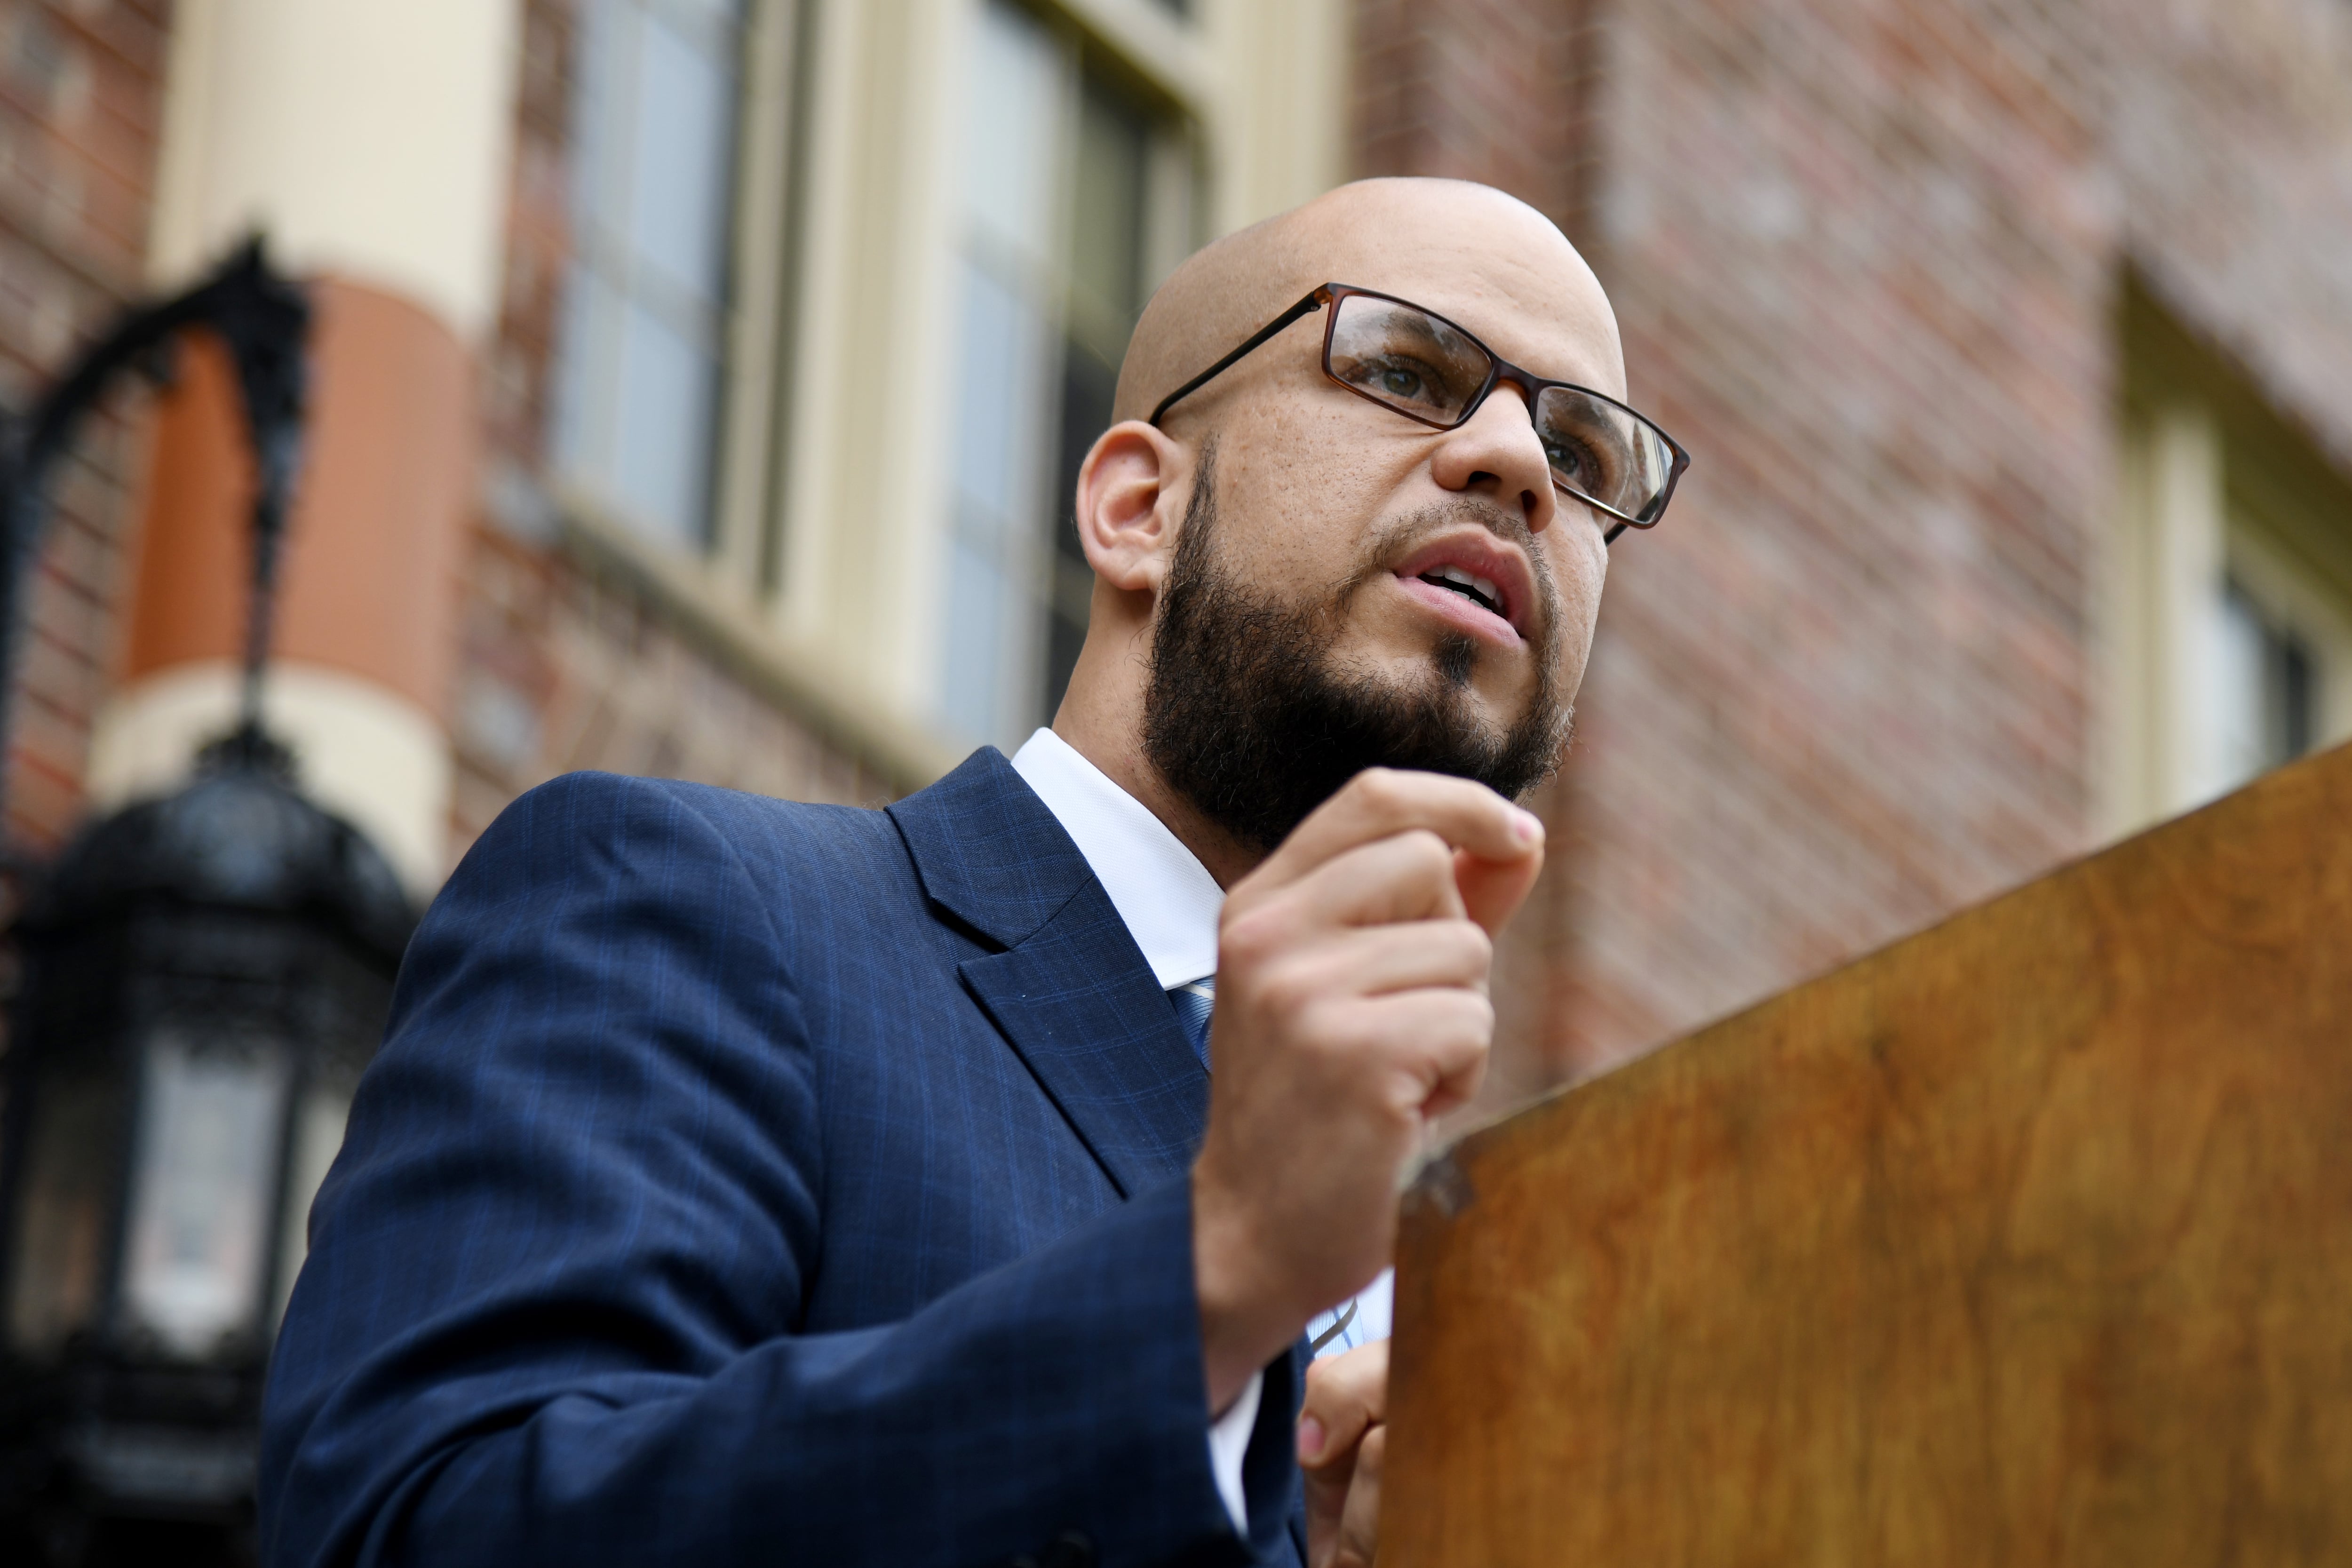 Denver Public Schools Superintendent Alex Marrero, wearing glasses and a blue checkered suit jacket, makes a speech outdoors at a wooden podium.